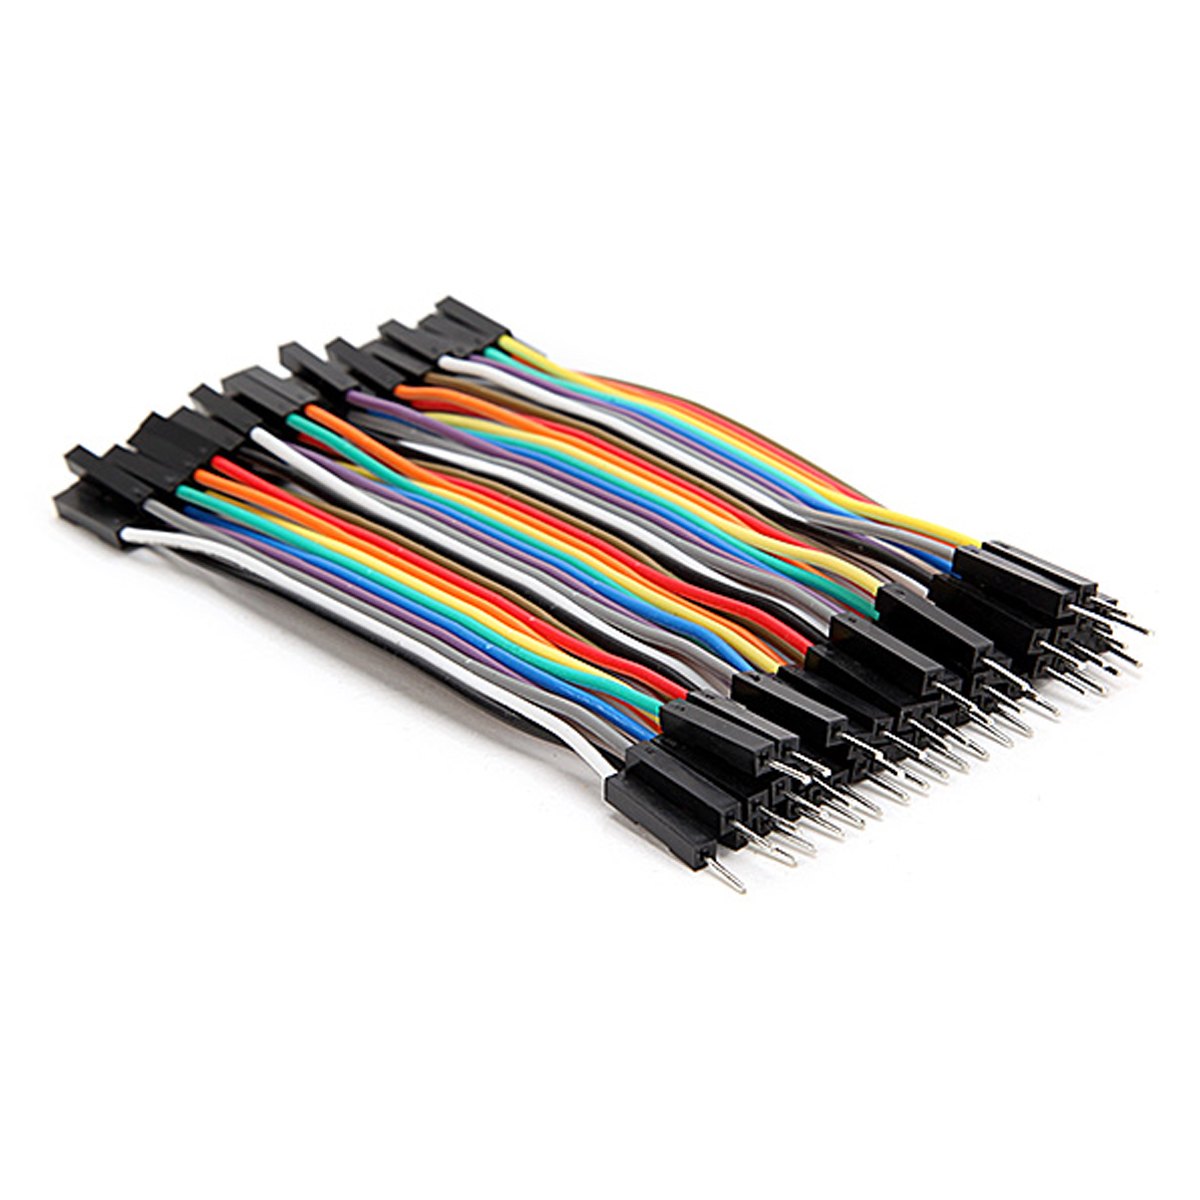 40pcs-10cm-Male-To-Female-Jumper-Cable-Dupont-Wire-994063-4